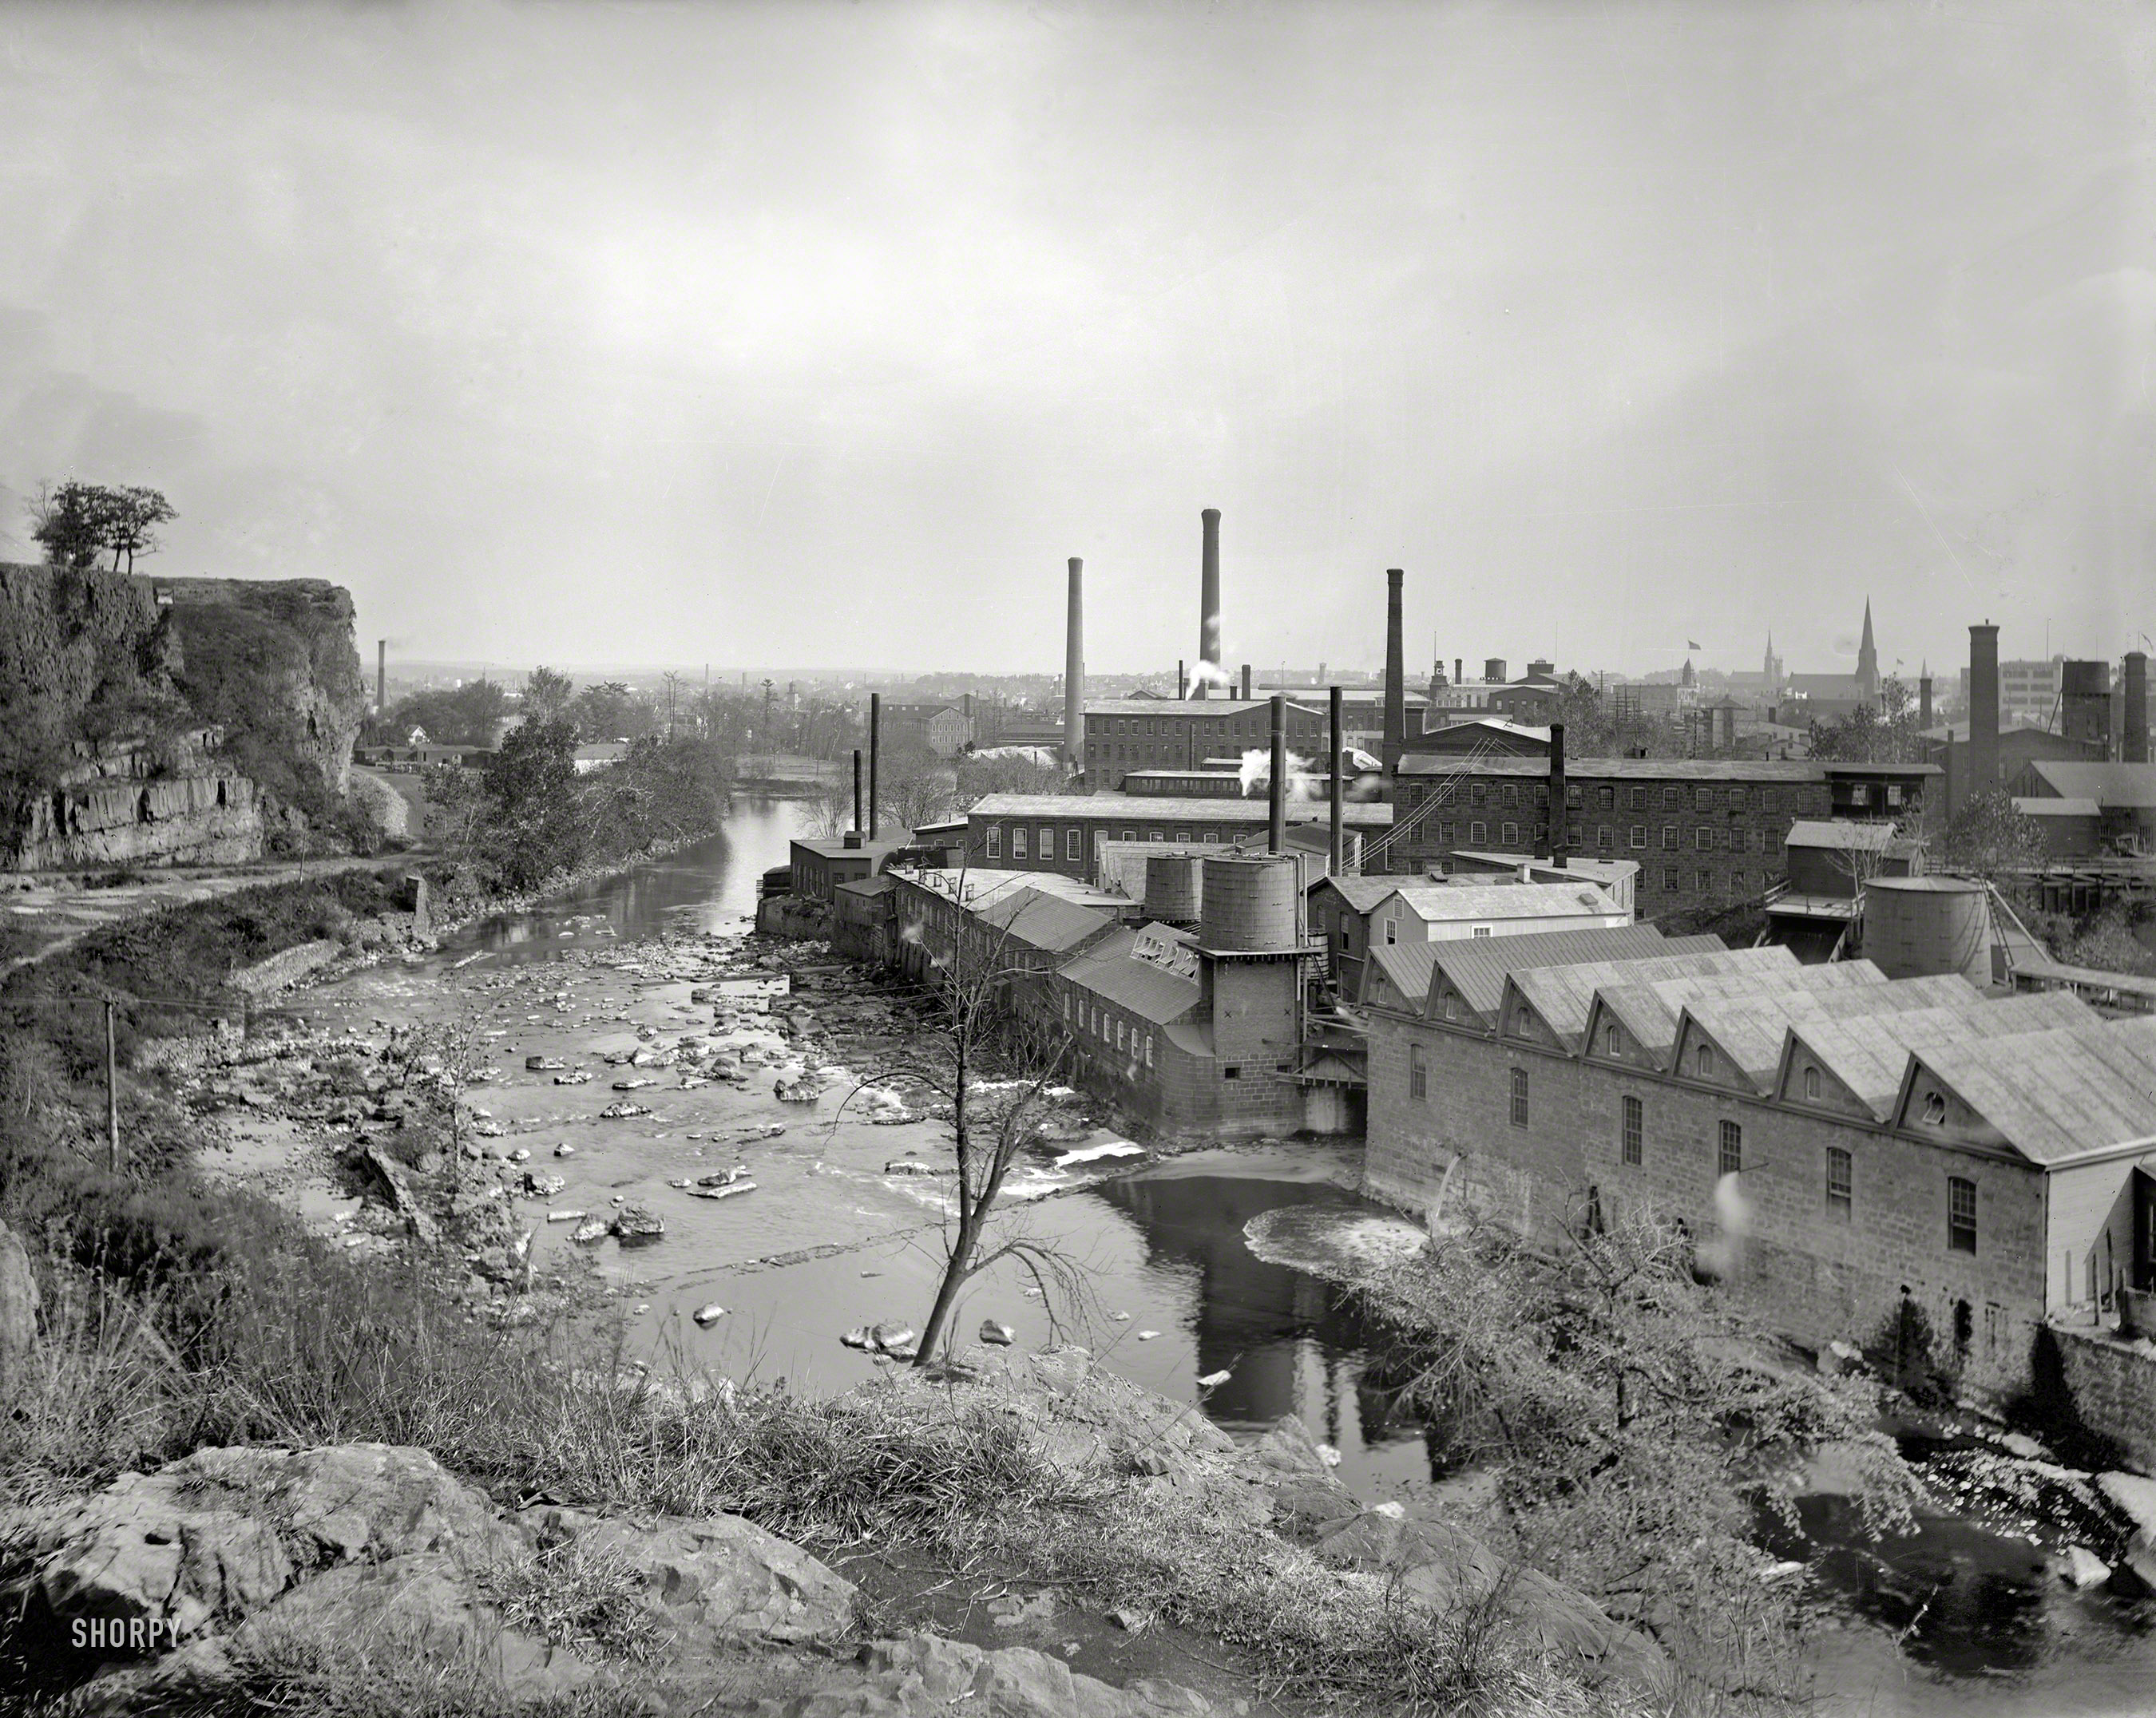 Circa 1901. "Paterson, N.J., from Water Works Park." Lovely Paterson, Pearl of the Passaic. 8x10 inch glass negative, Detroit Publishing Co. View full size.